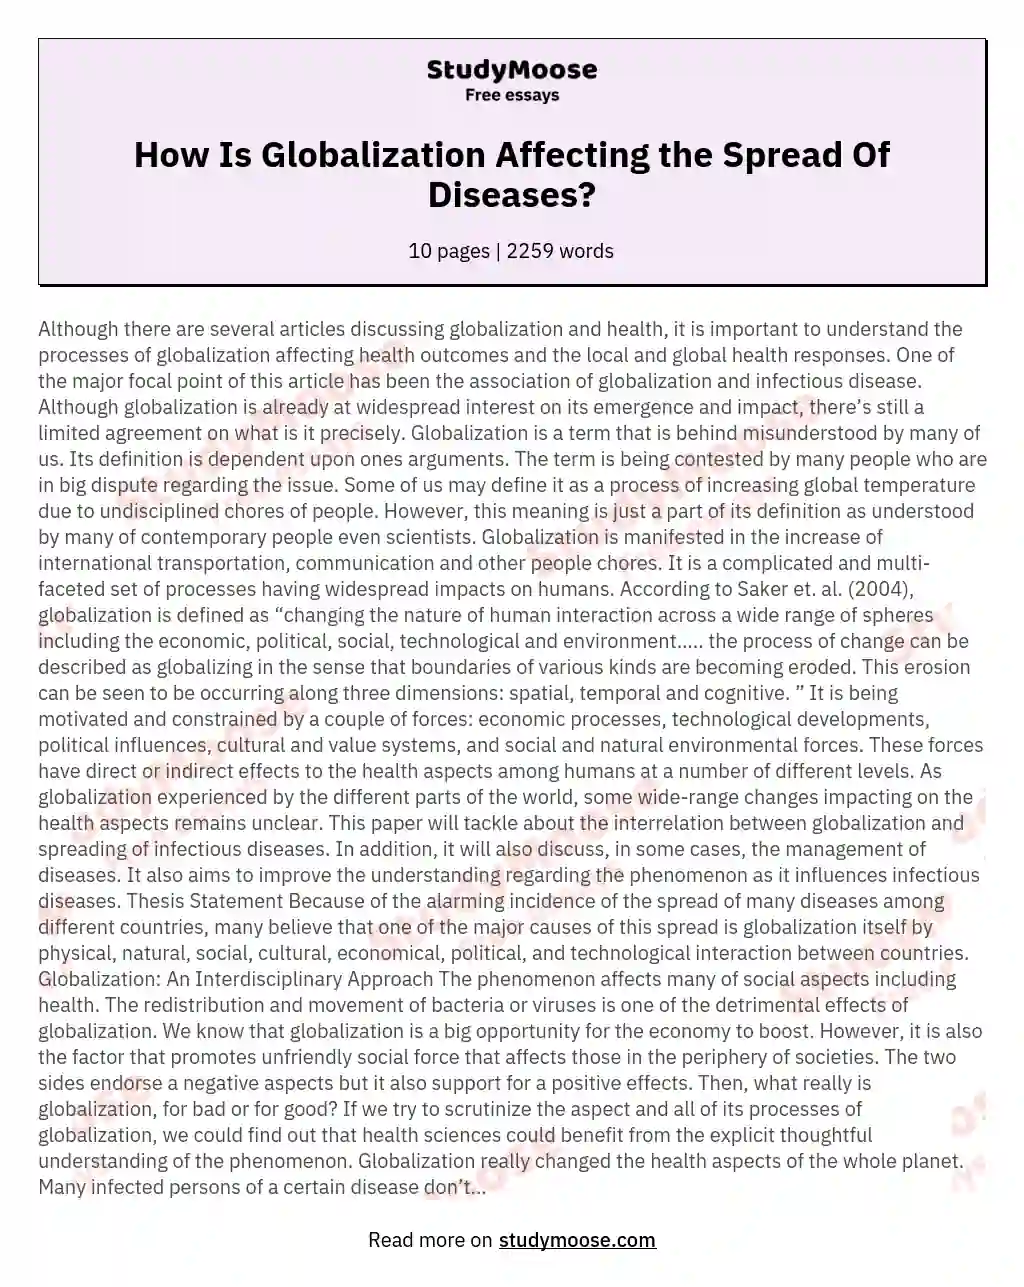 How Is Globalization Affecting the Spread Of Diseases? essay